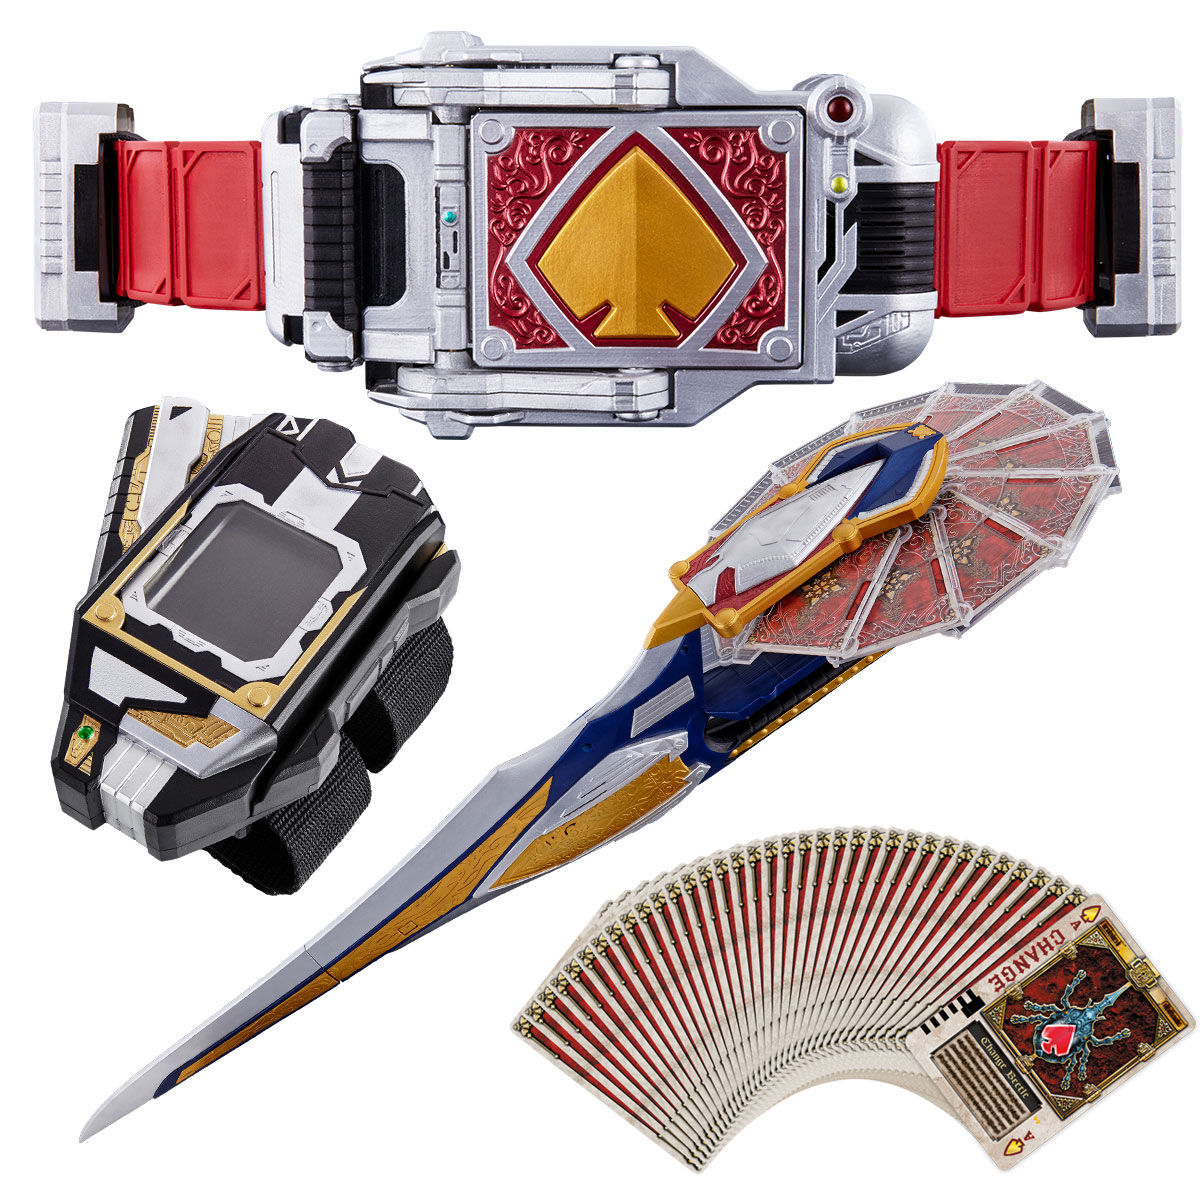 Complete Selection Modification Blaybuckle Rouseabsorber Blayrouzer 仮面ライダー剣 ブレイド 趣味 コレクション バンダイナムコグループ公式通販サイト